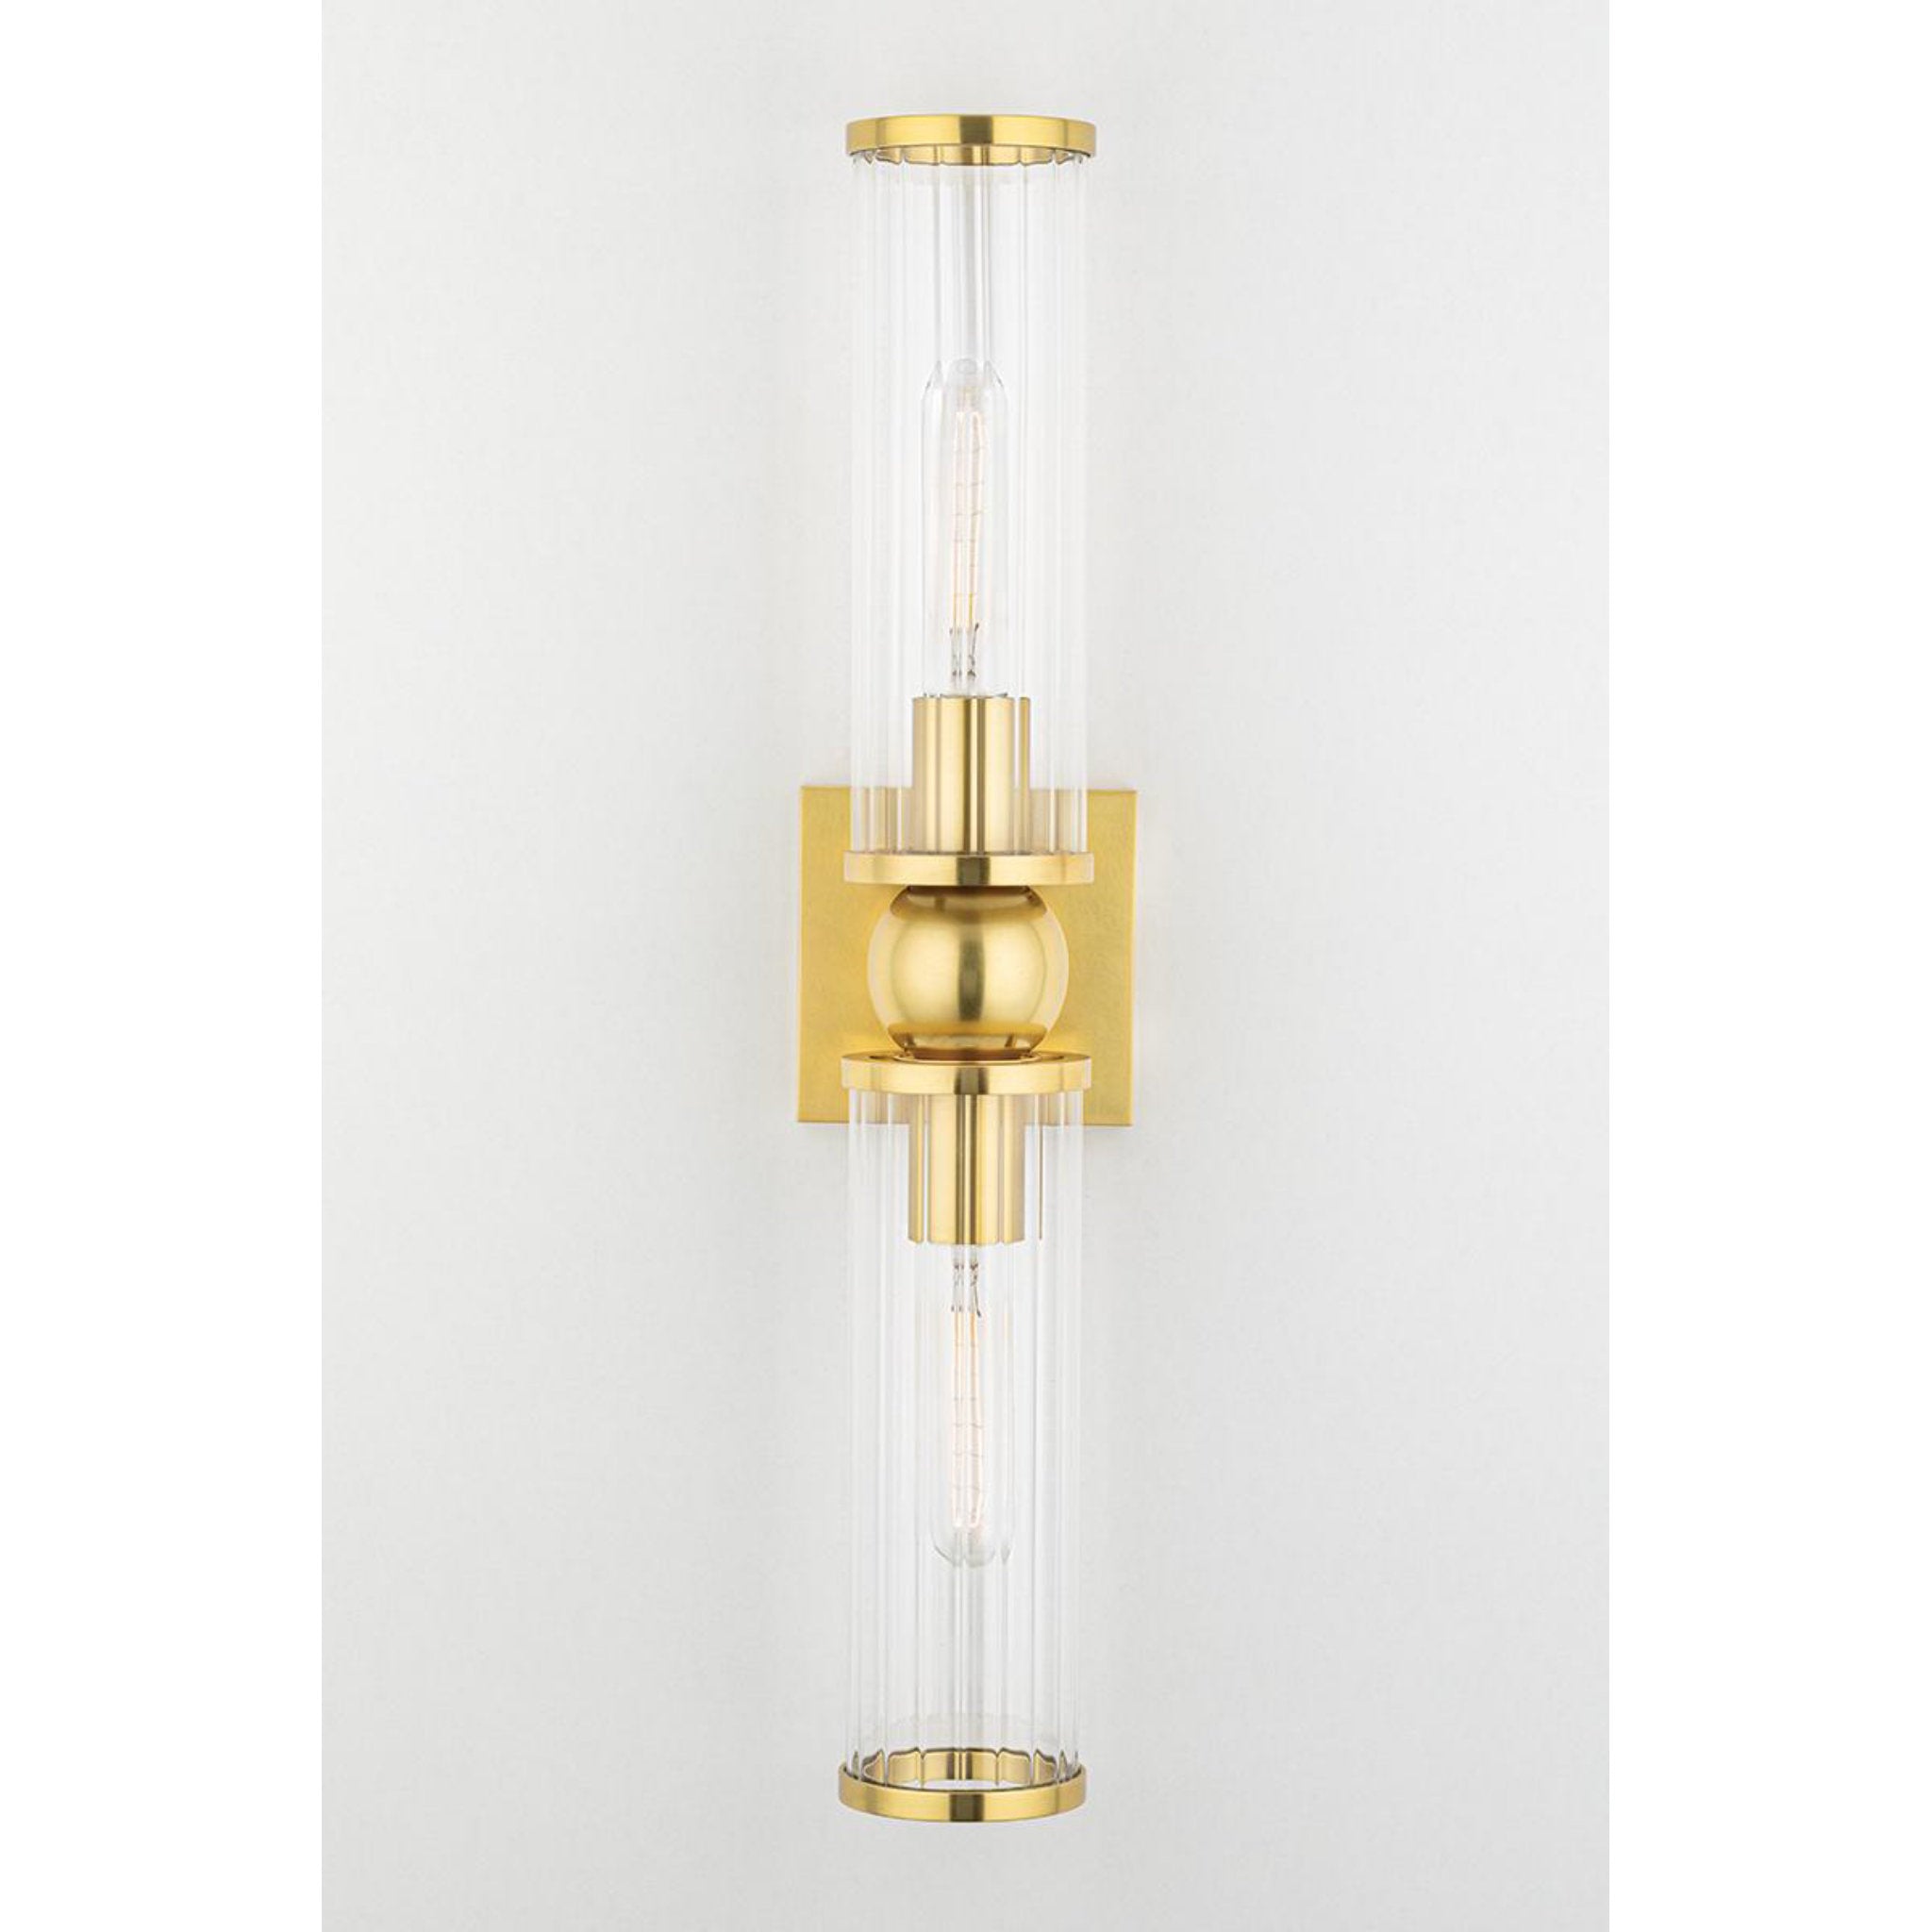 Malone 1 Light Wall Sconce in Polished Nickel